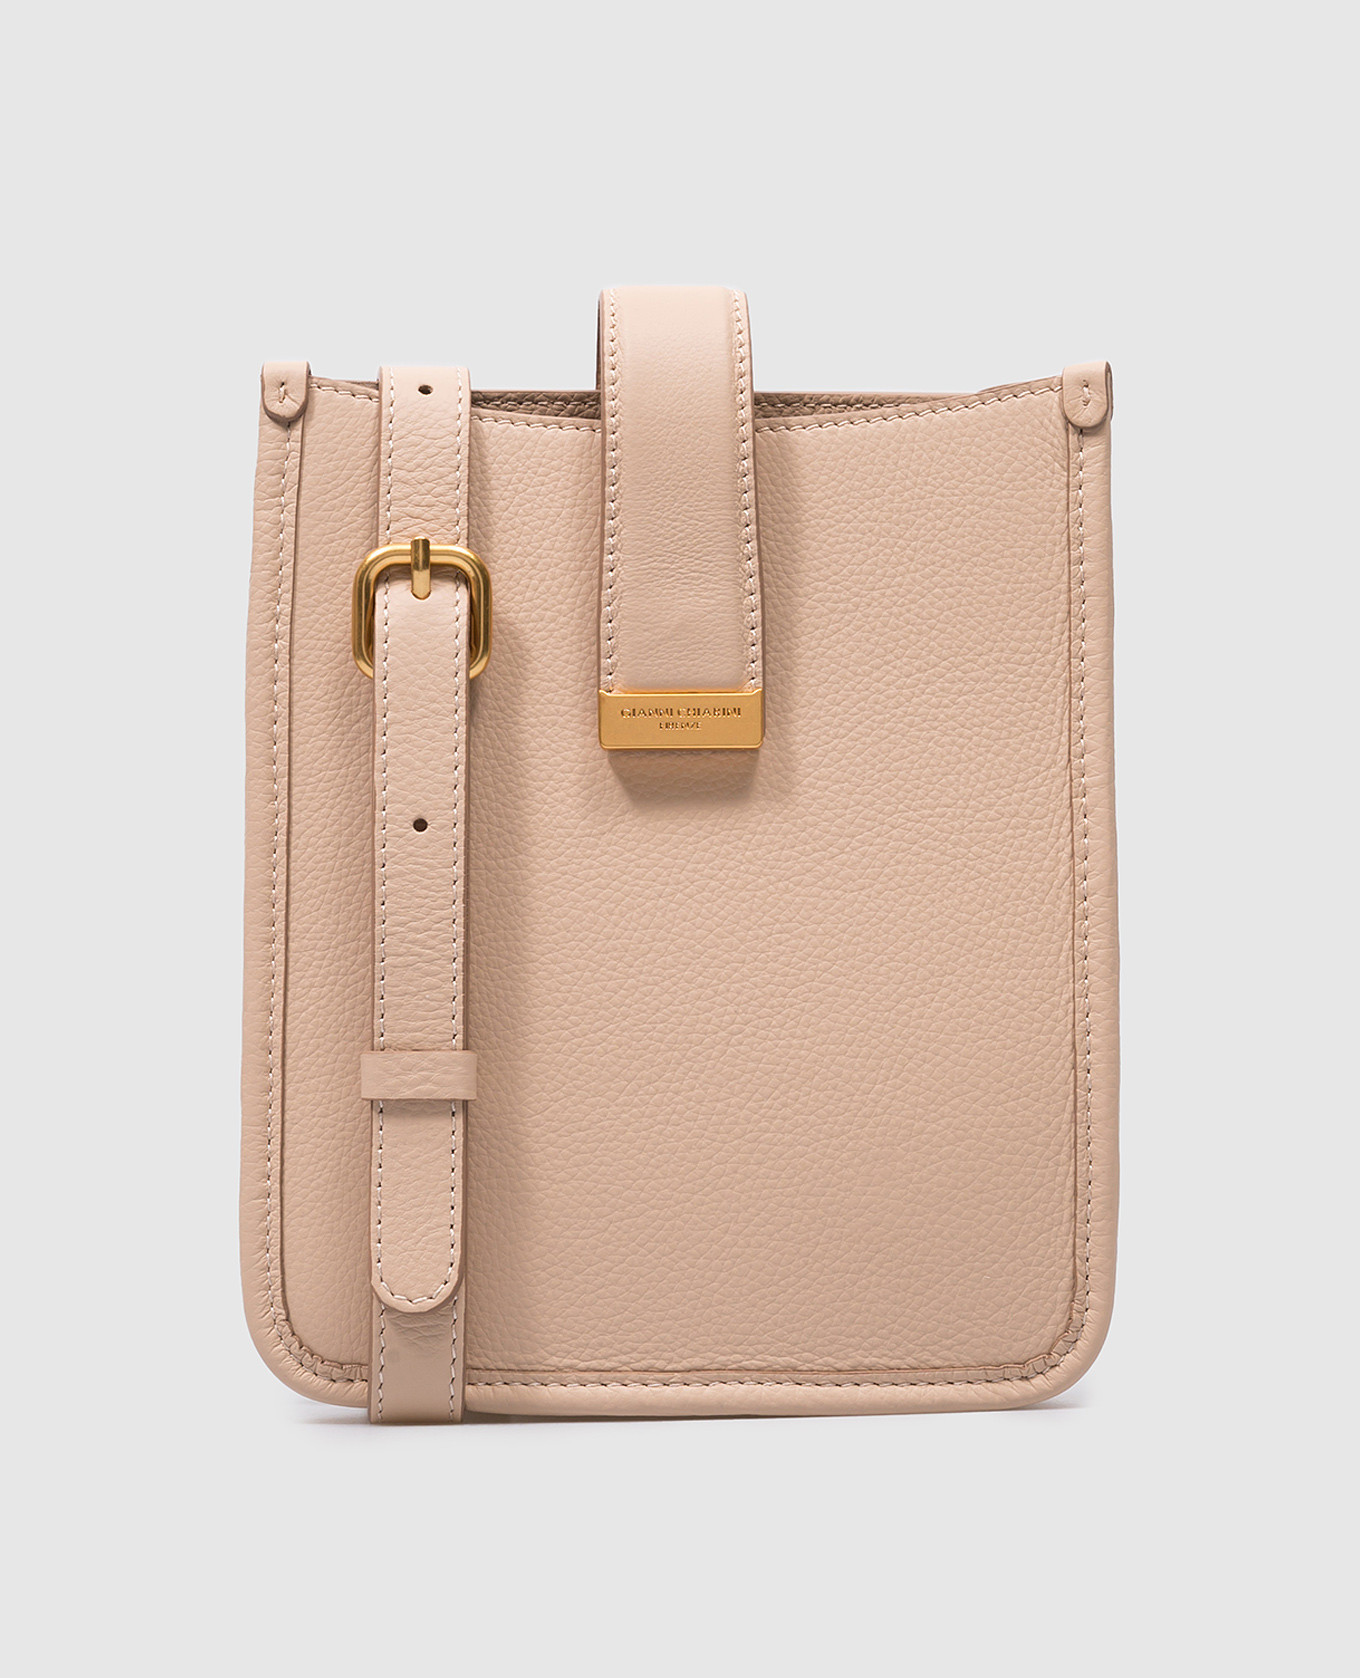 Caterina beige leather bag with logo engraving